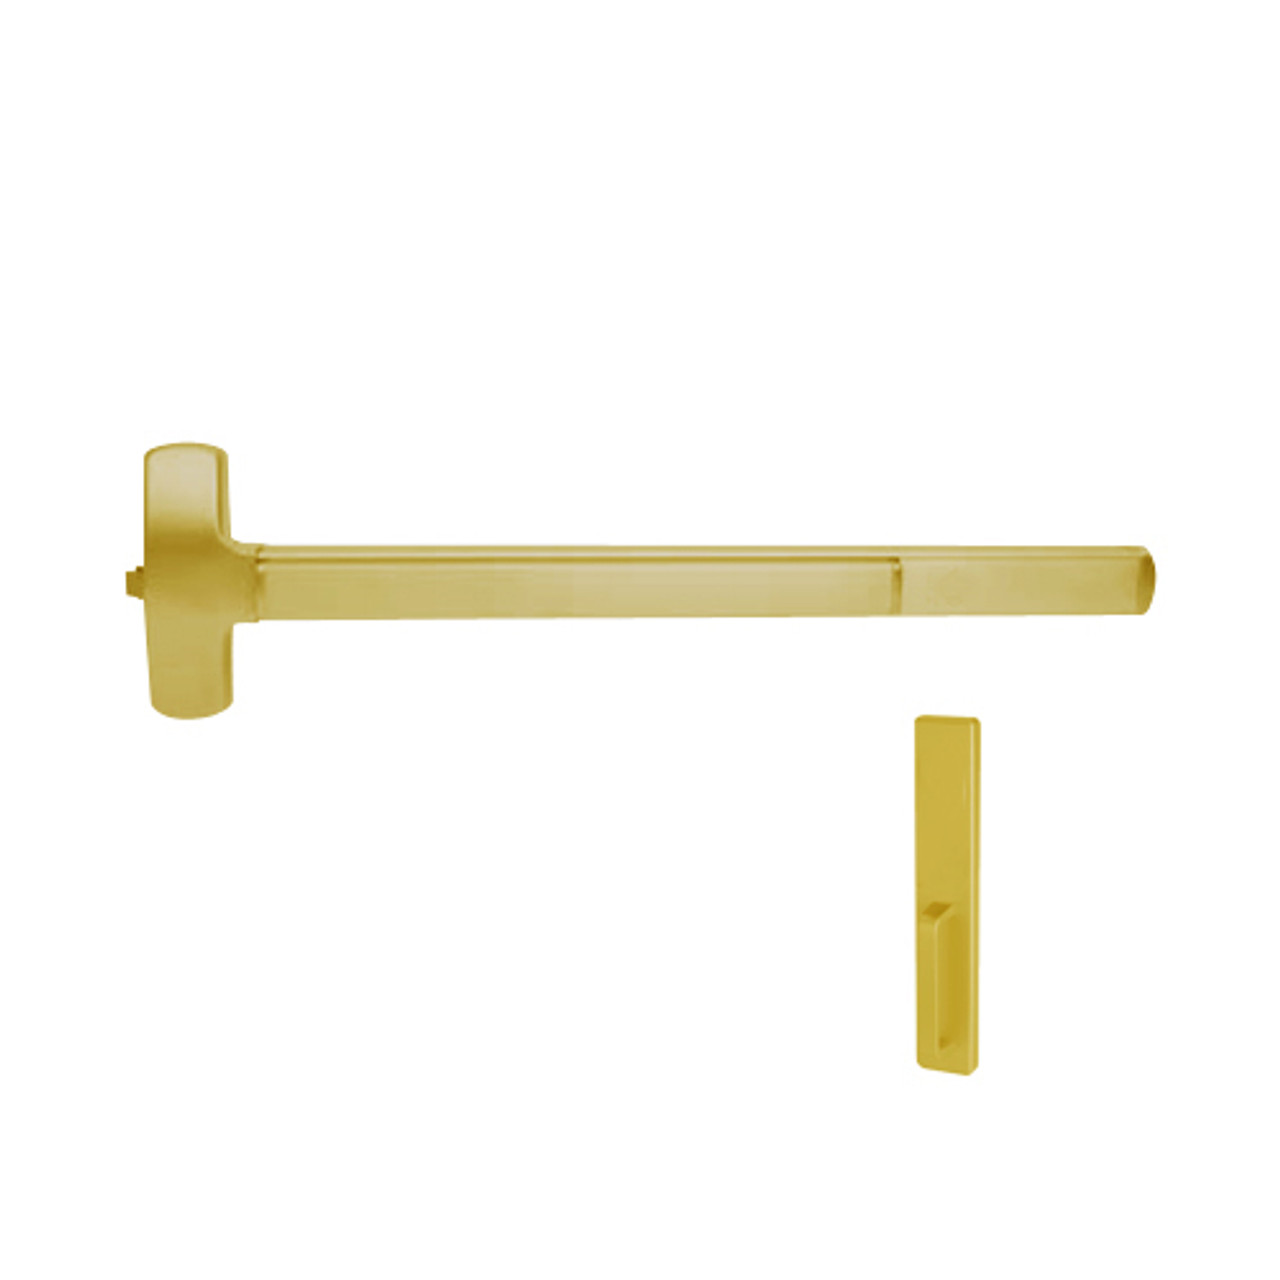 F-25-R-DT-US3-3 Falcon Exit Device in Polished Brass